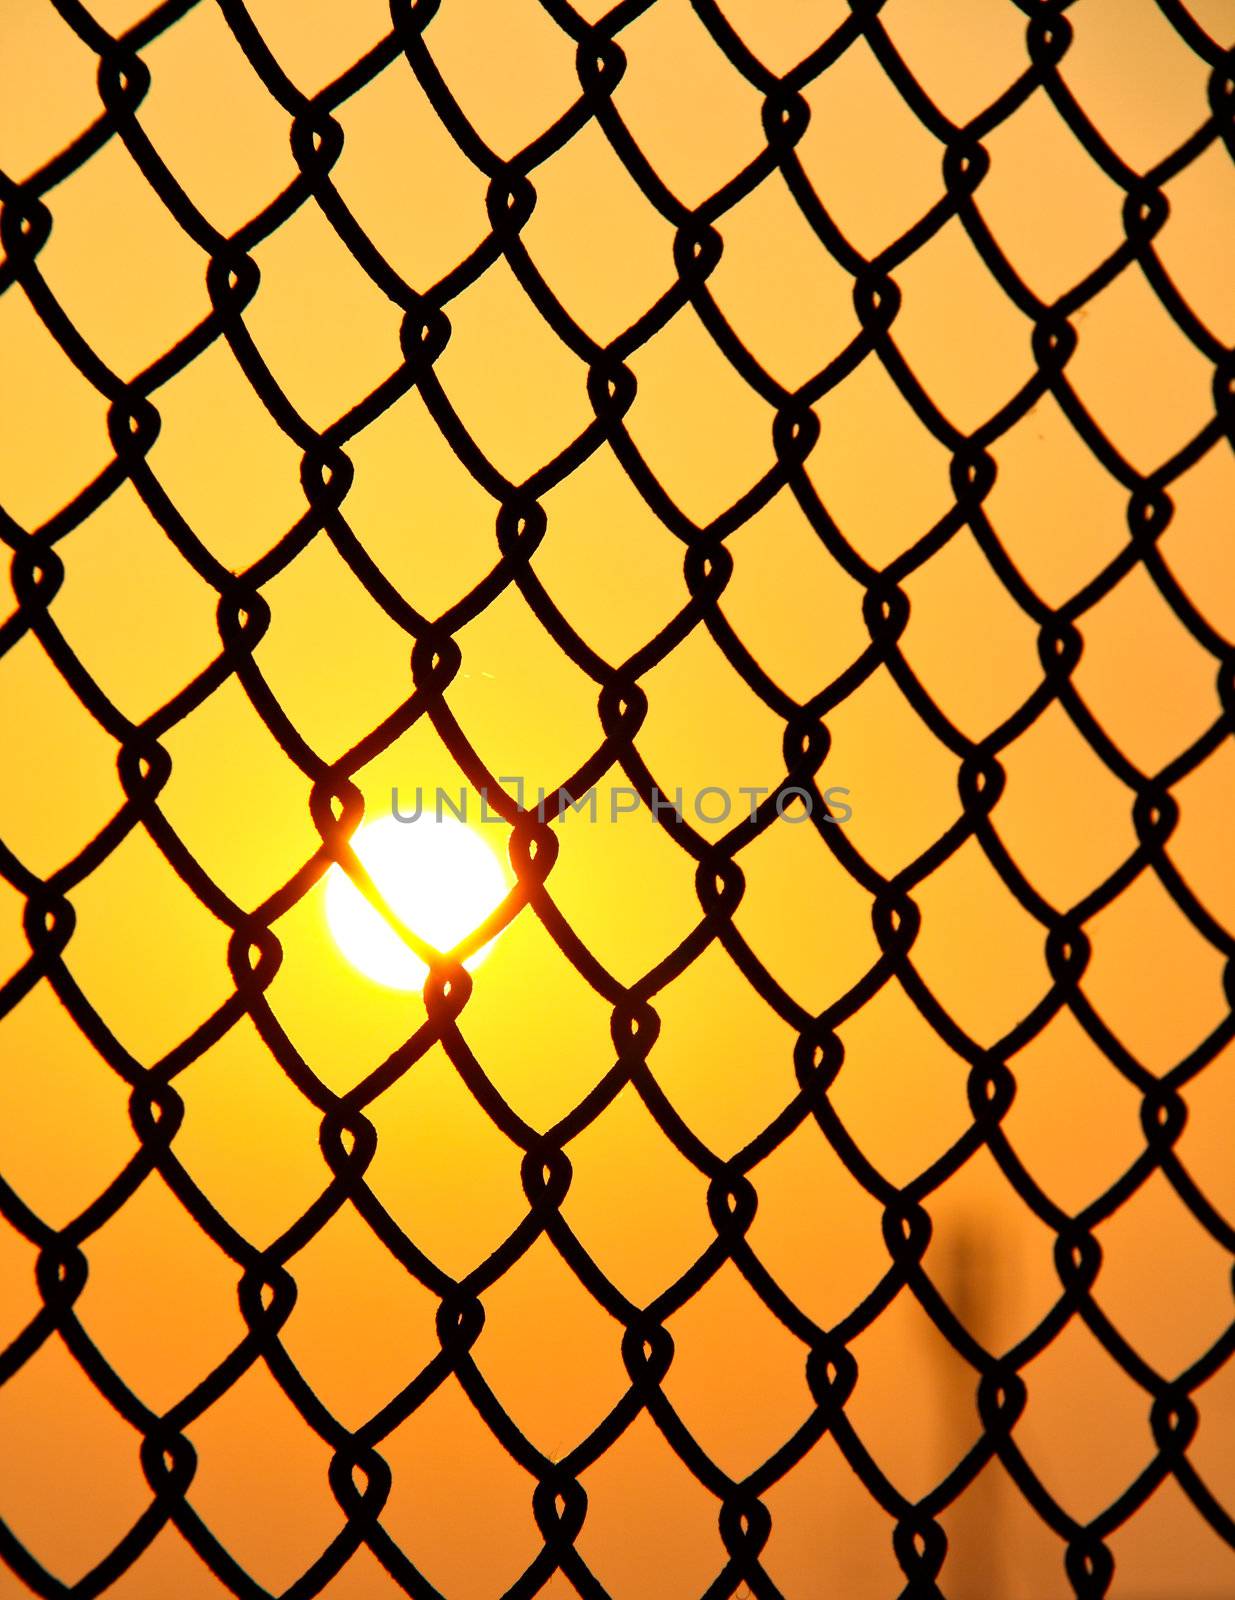 chain link wire fence with sun rise